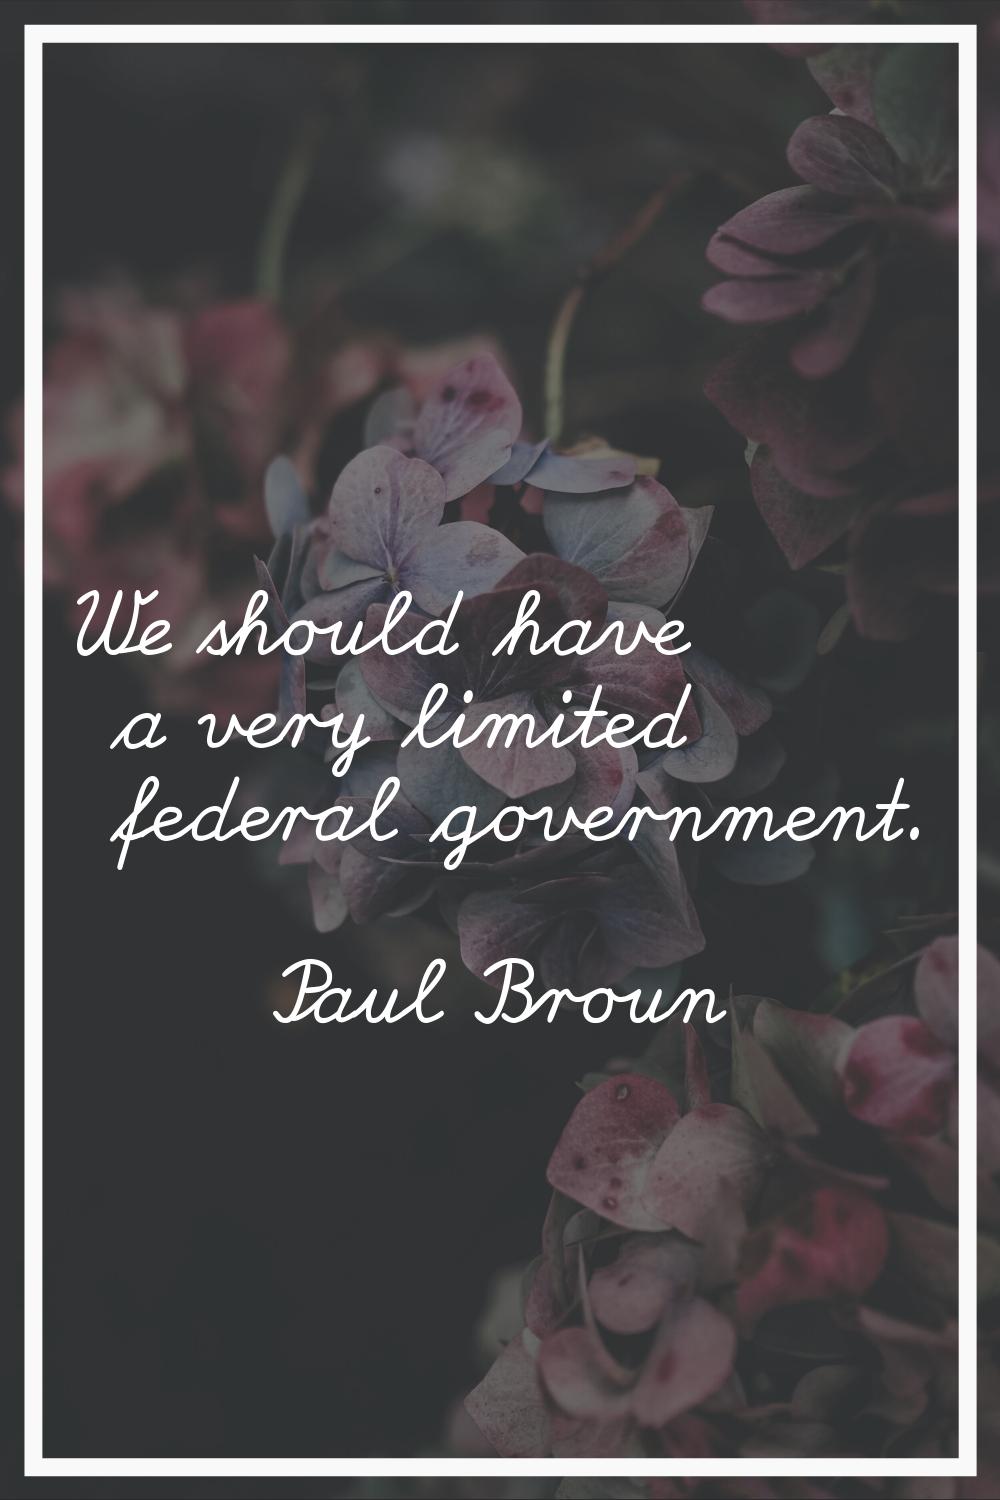 We should have a very limited federal government.